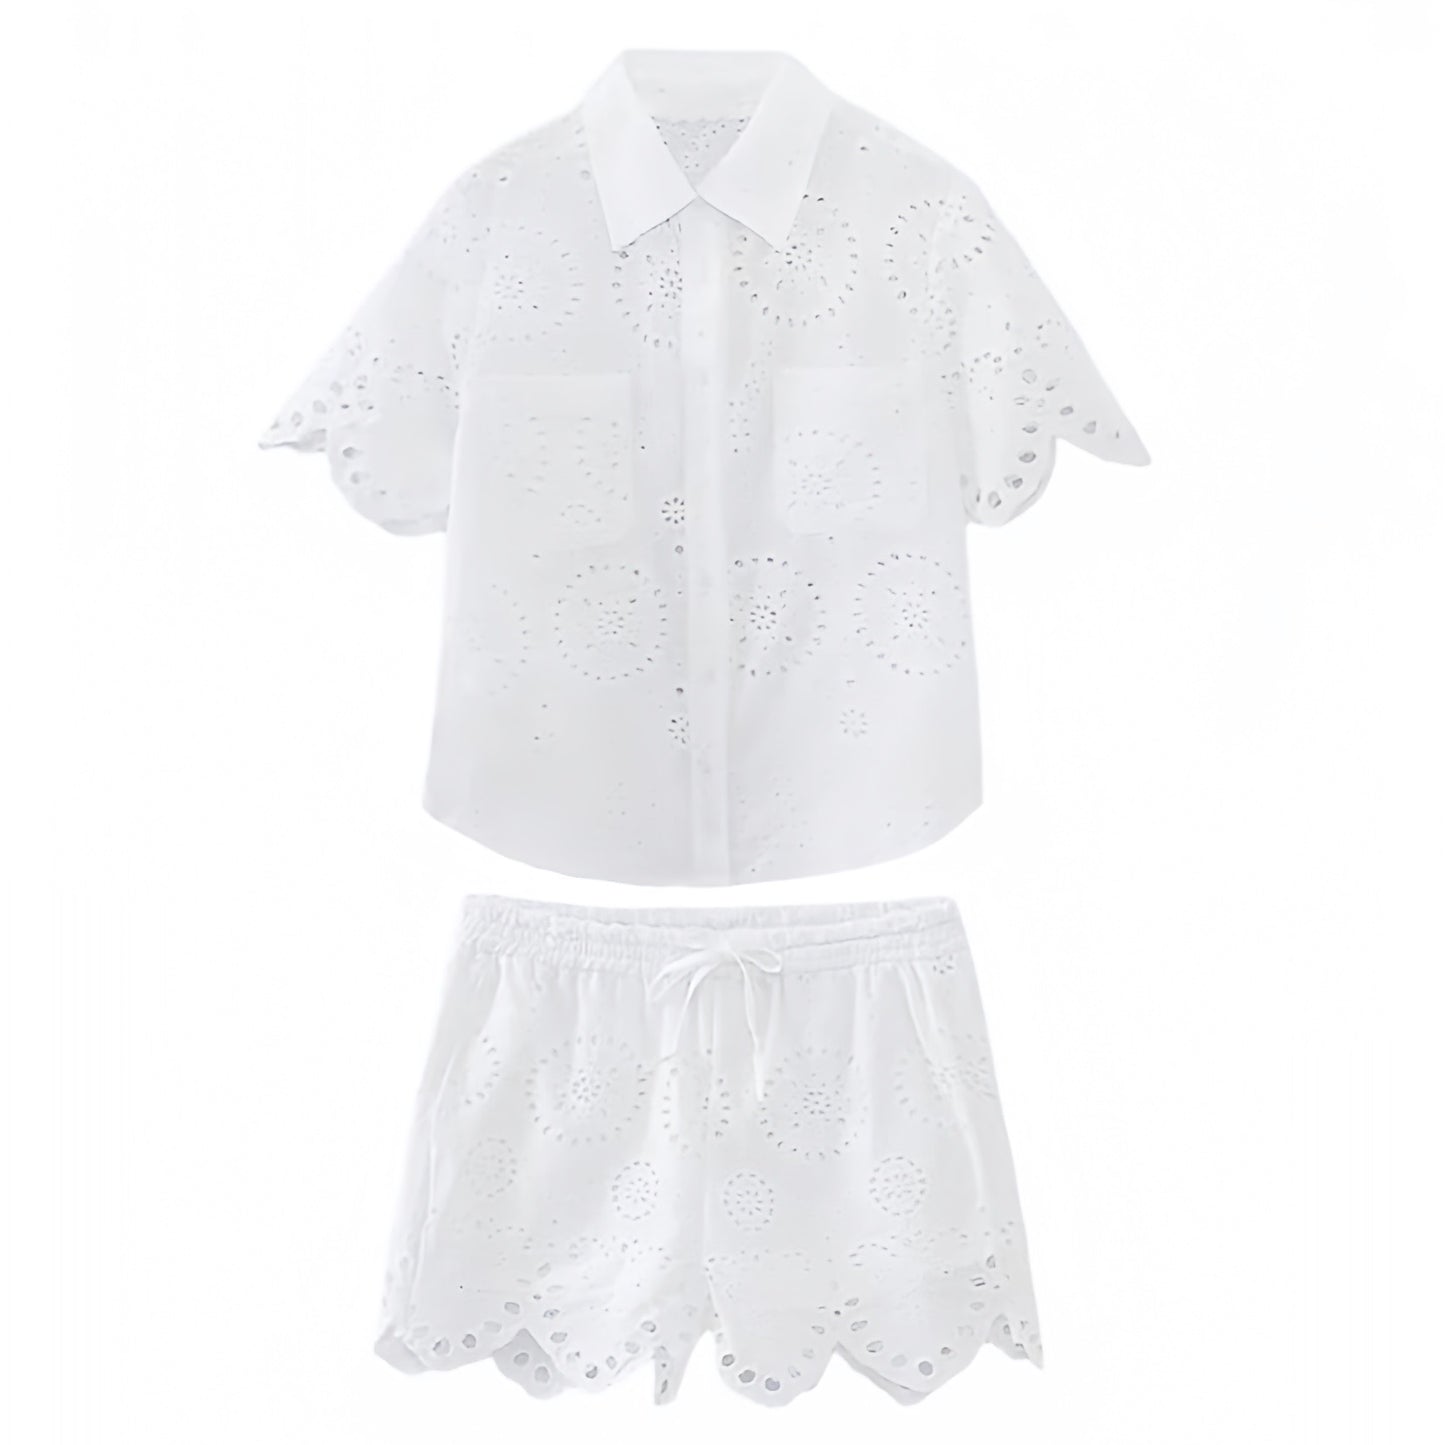 white-ivory-eyelet-embroidered-linen-button-down-v-neck-ruffled-short-sleeve-shirt-mid-low-rise-draw-string-shorts-top-and-bottoms-set-outfit-women-ladies-chic-trendy-spring-2024-summer-elegant-casual-semi-formal-feminine-classy-european-tropical-vacation-beach-wear-preppy-style-coastal-granddaughter-zara-revolve-brandy-melville-aritzia